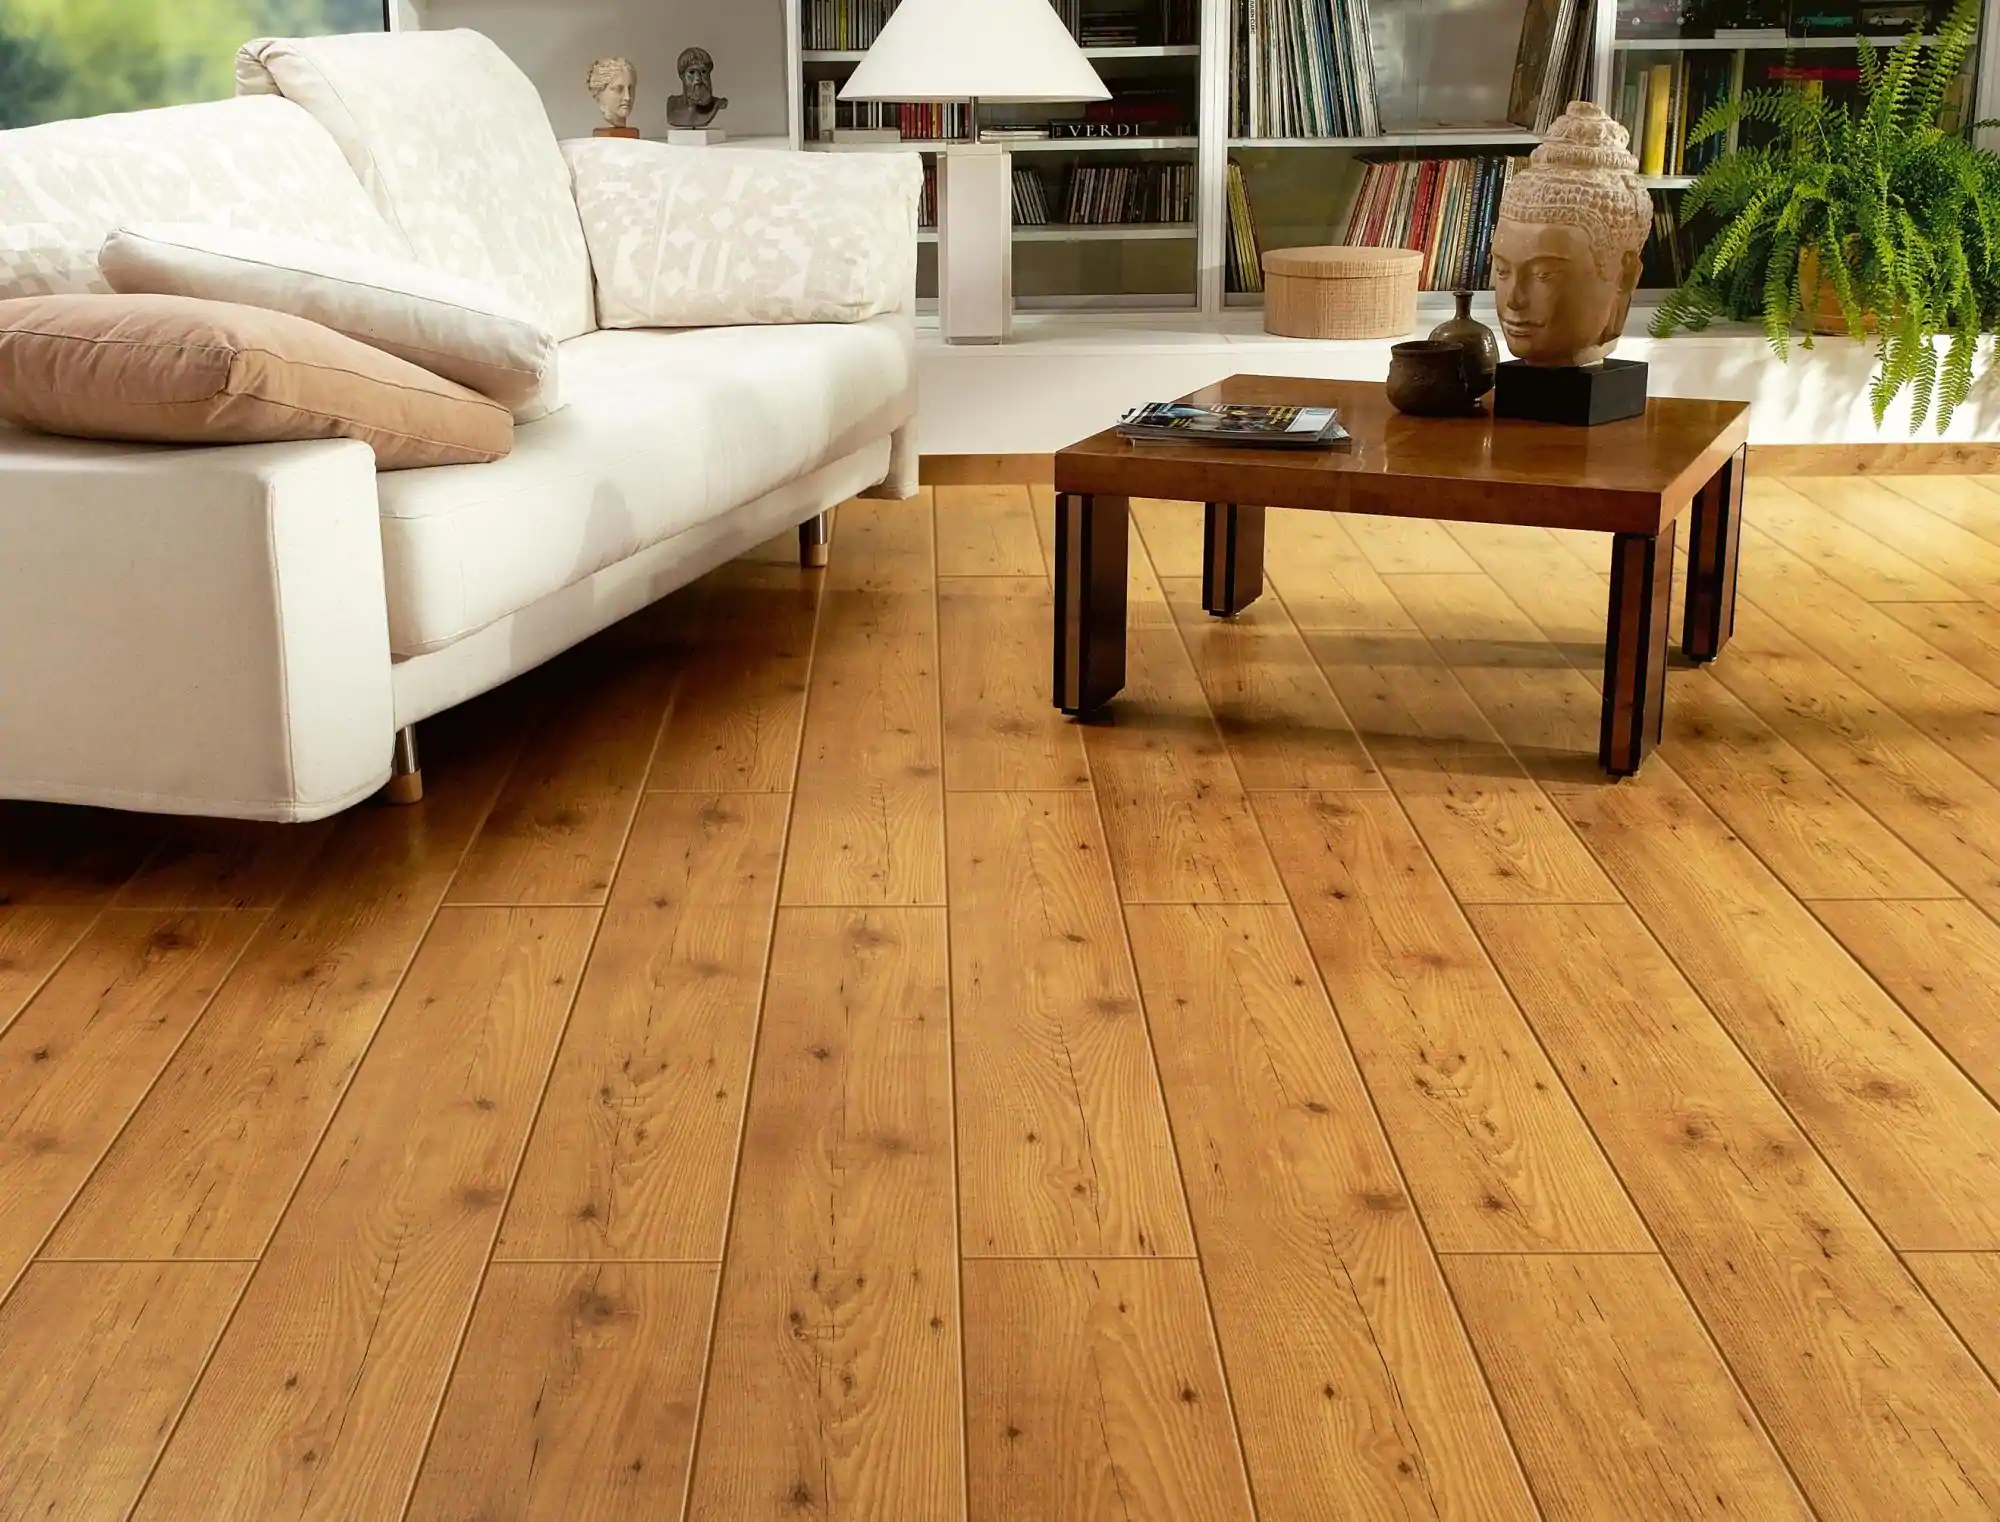 Credible Timber Flooring Services